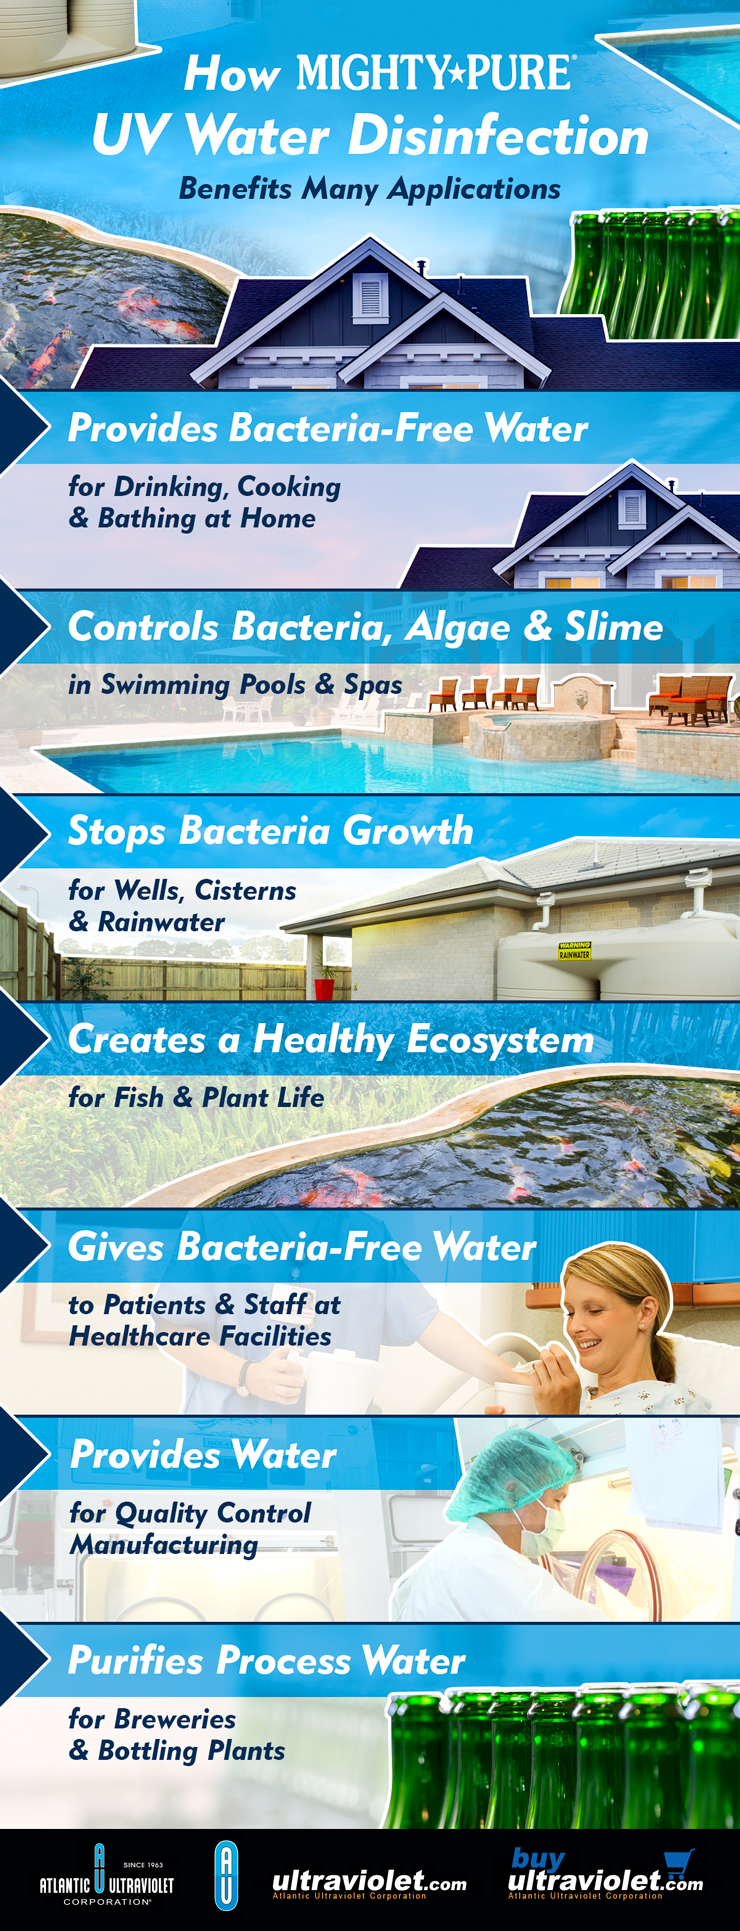 MIGHTY PURE UV Water Disinfection Benefits Many Applications: Infographic